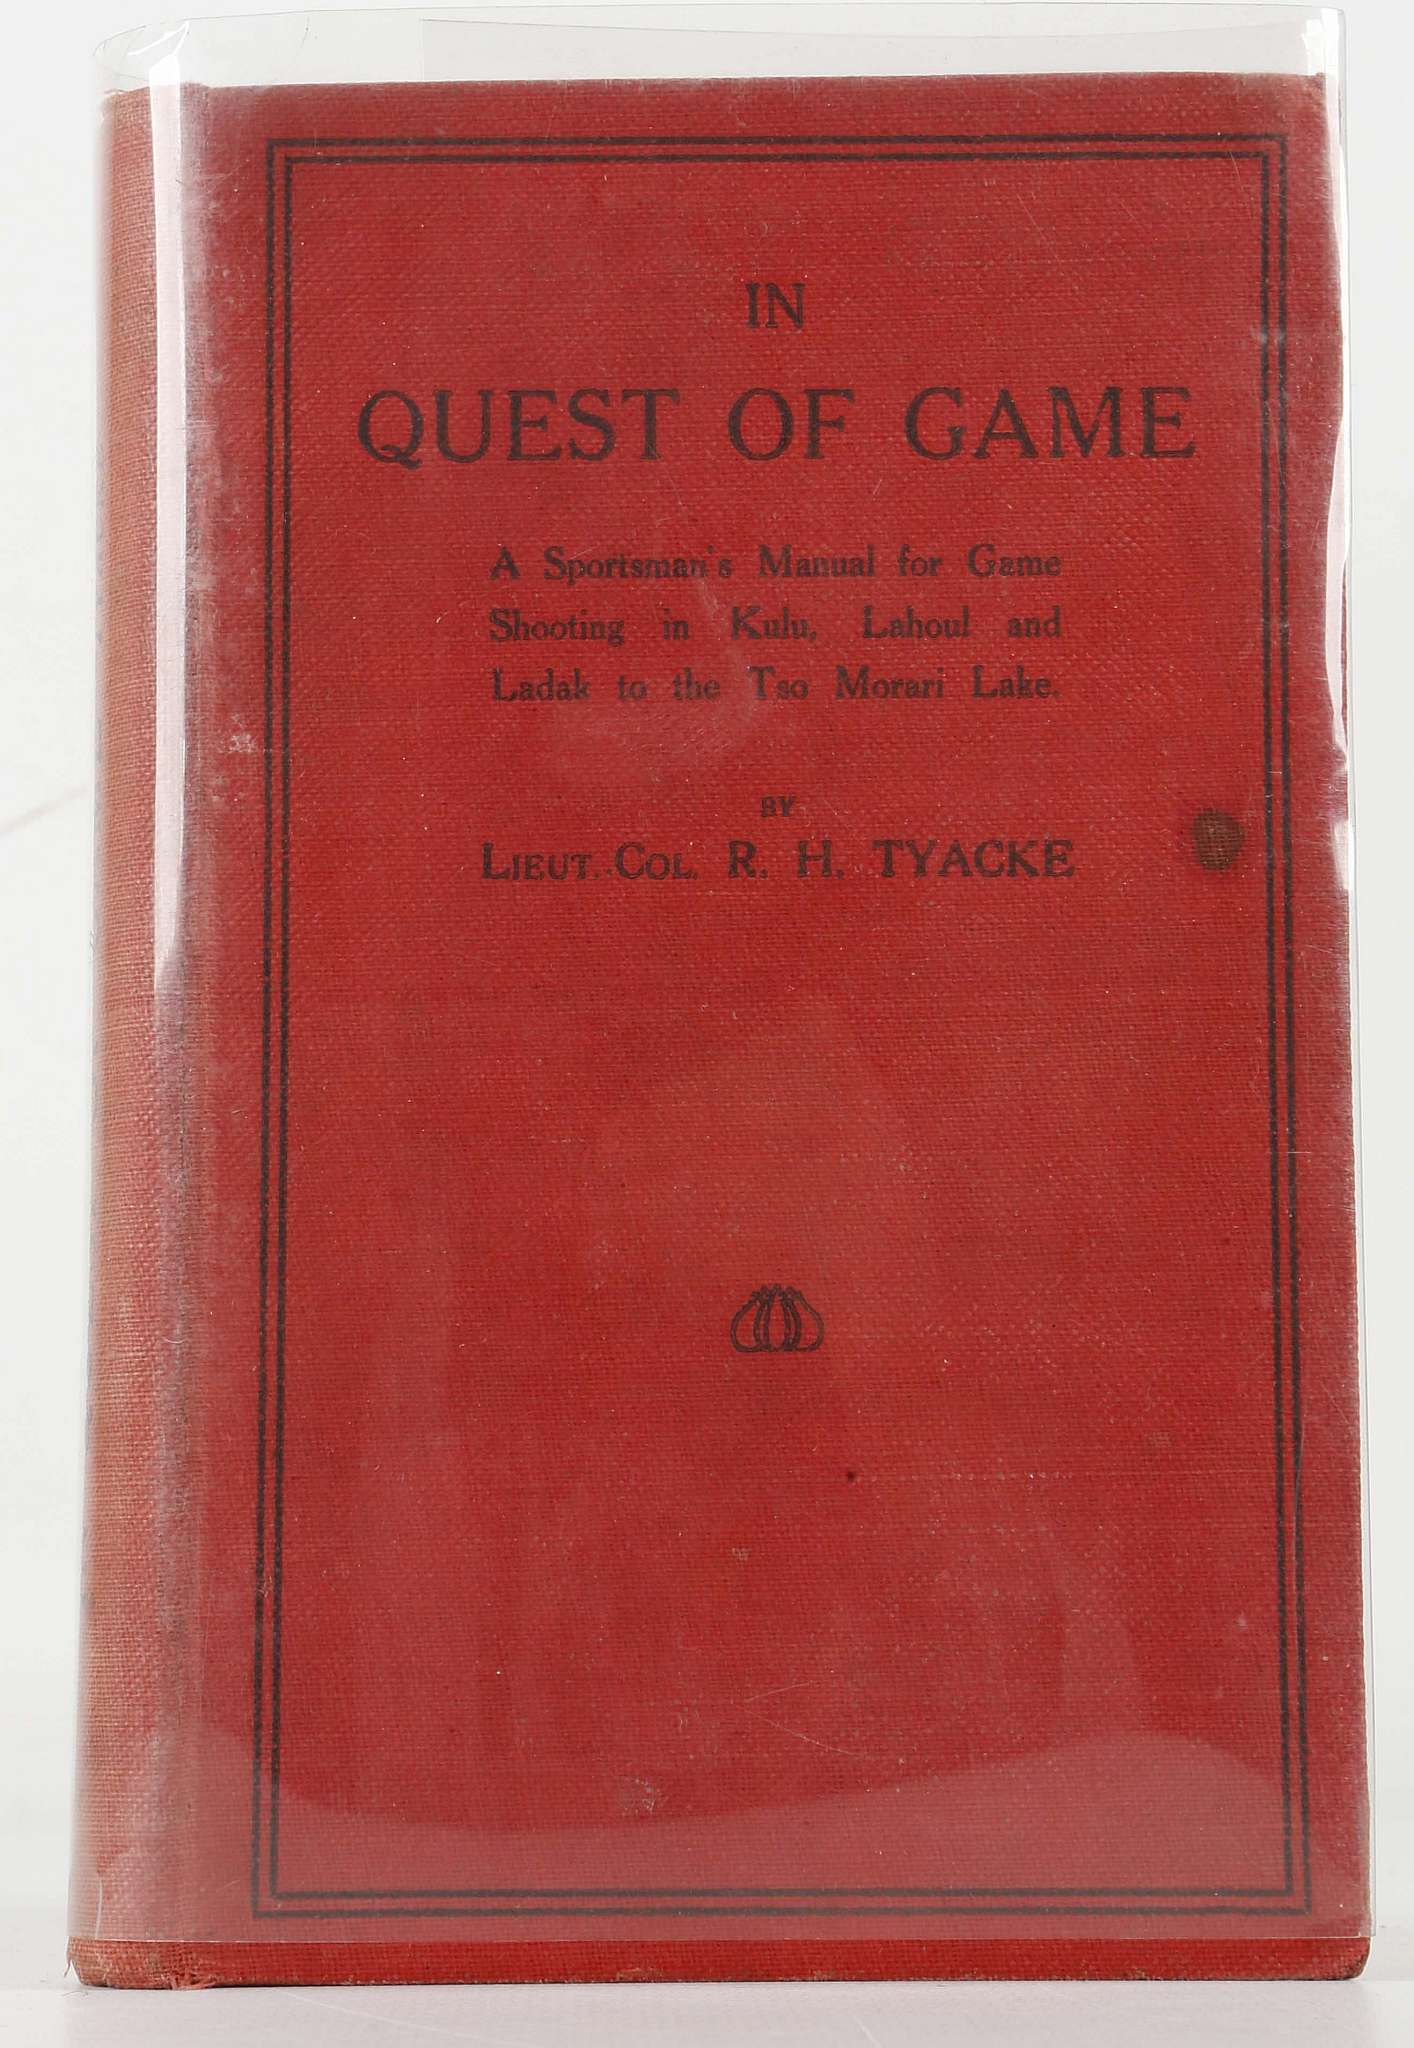 TYACKE, Lieut.-Col. R.H. In Quest of Game: A Sportsman’s Manual for Game Shooting in Kulu, Lahoul - Image 2 of 5